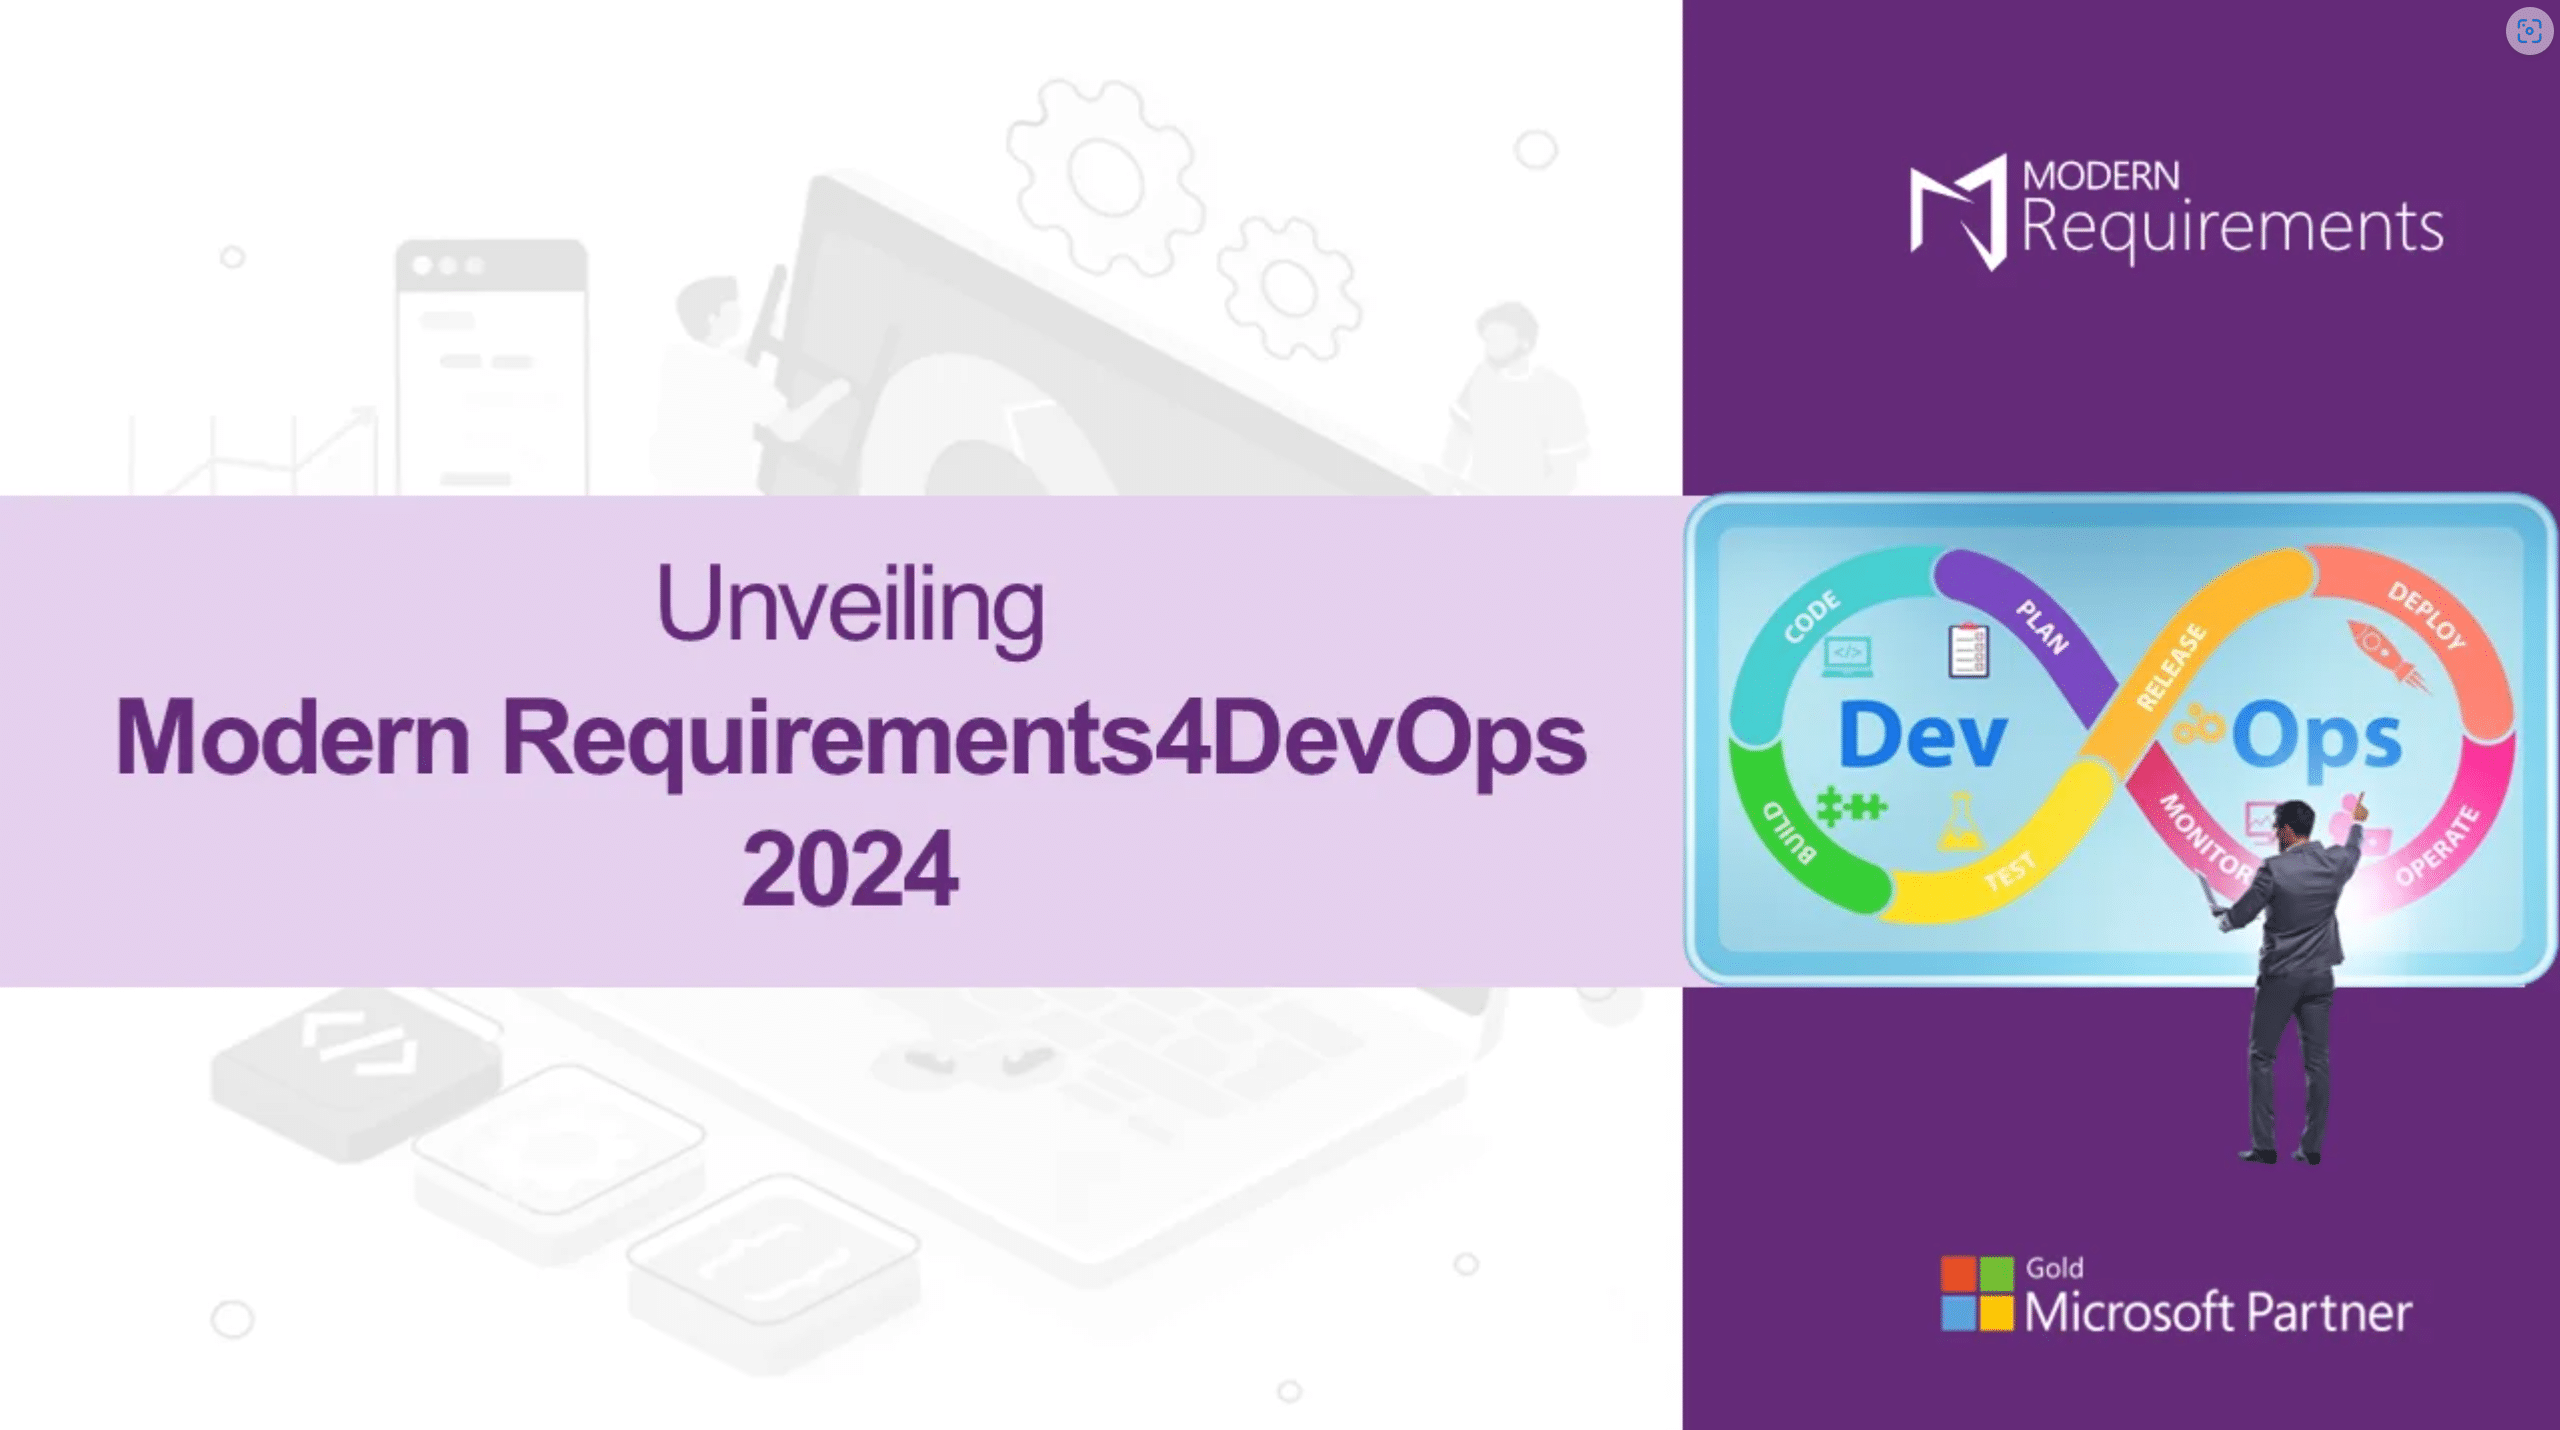 Modern Requirements4DevOps 2024 Vnext webinar image with text on the left and the DevOps cycle on the right.